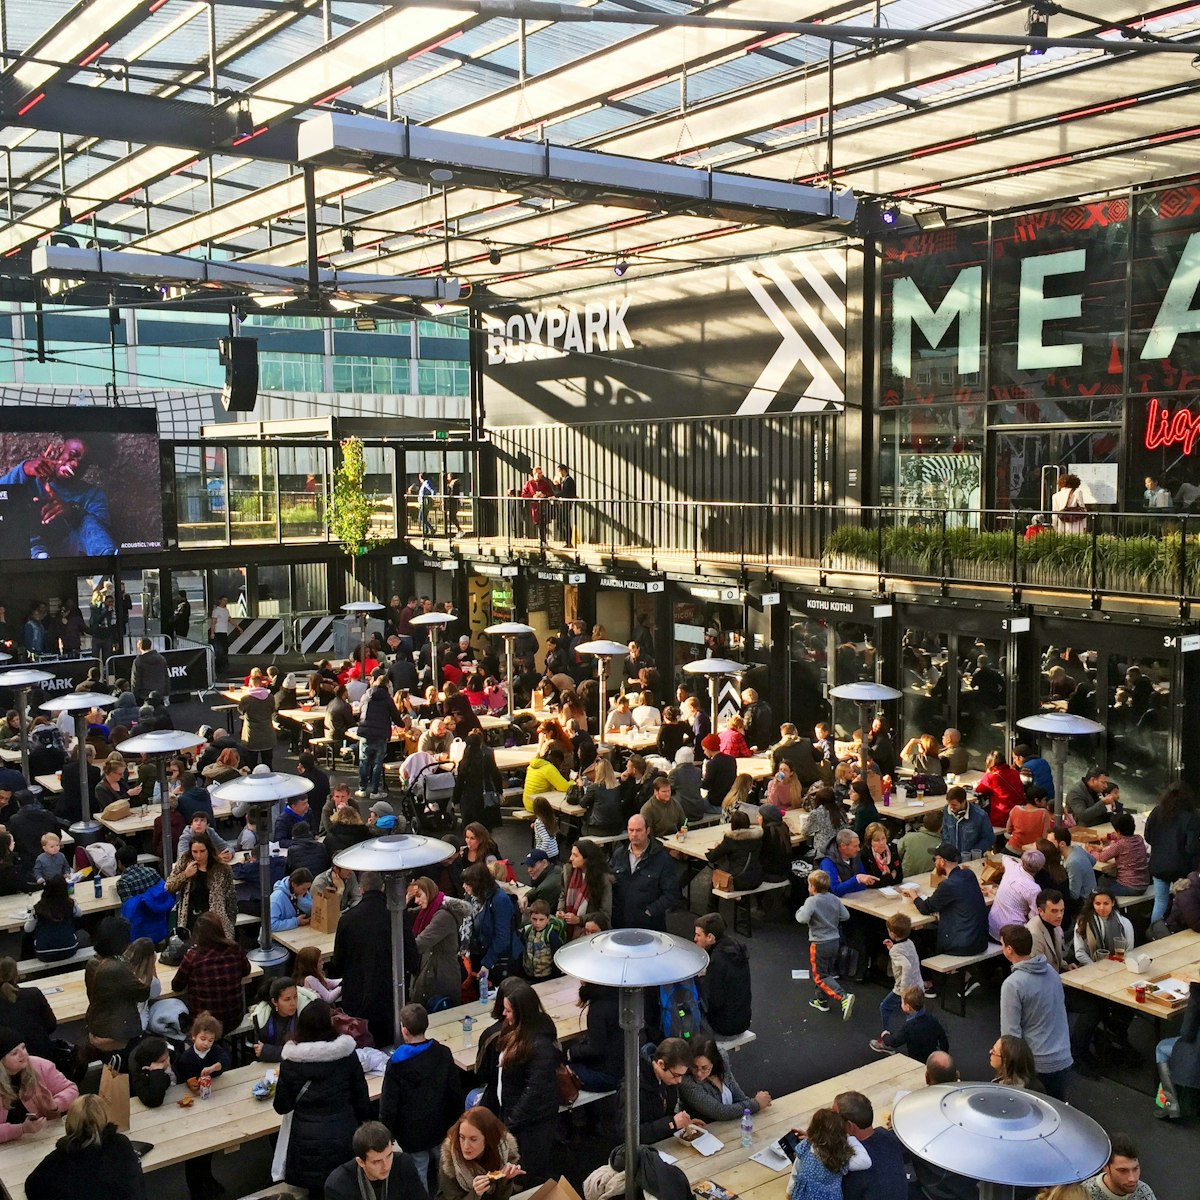 The central seating area of Boxpark in Croydon